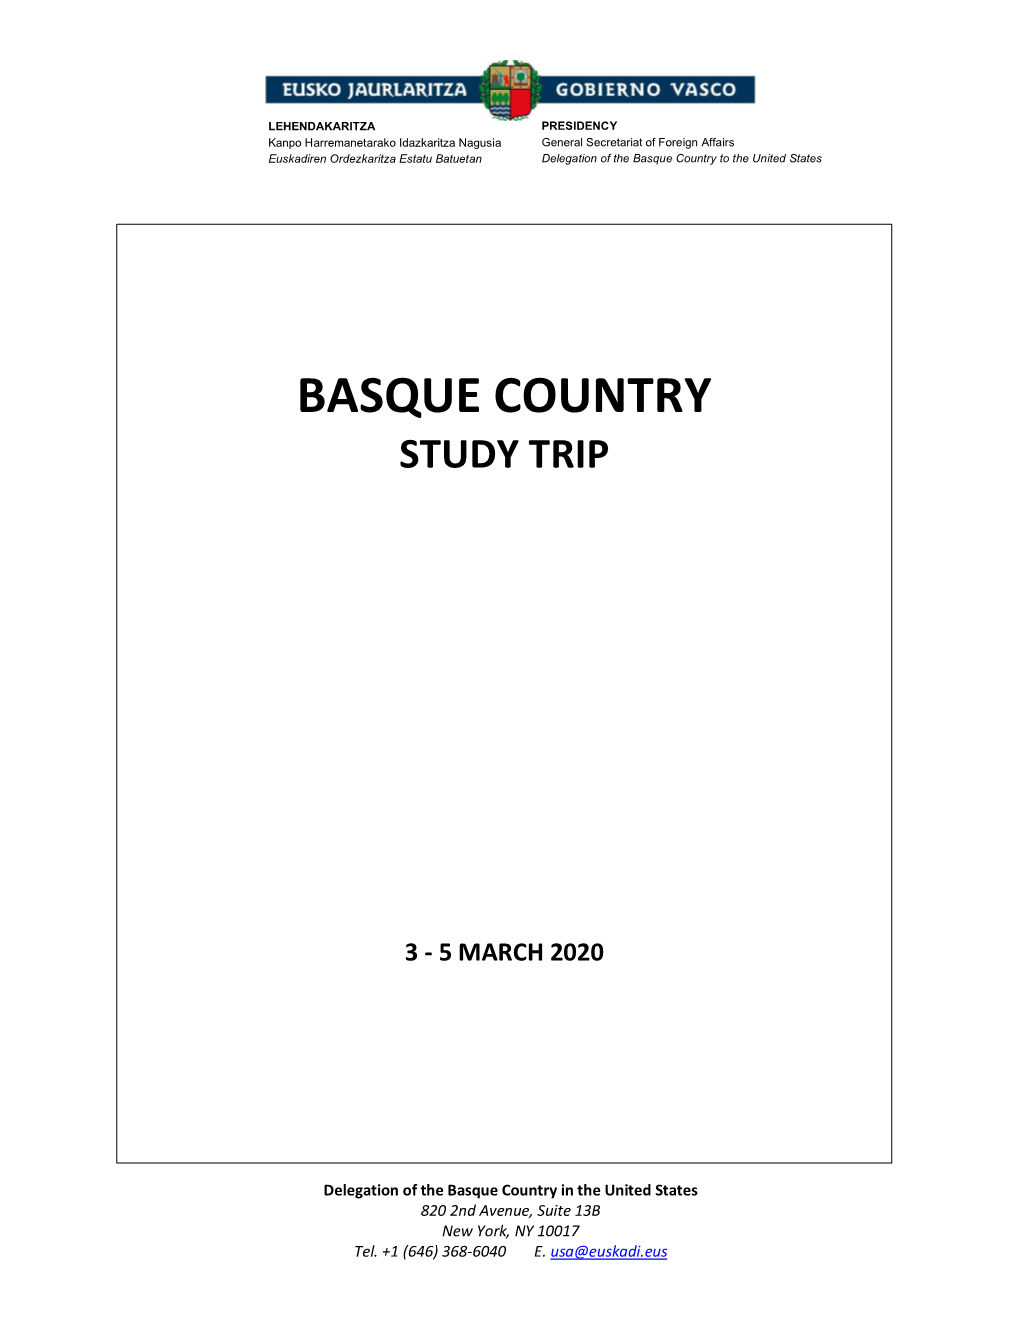 Basque Country to the United States